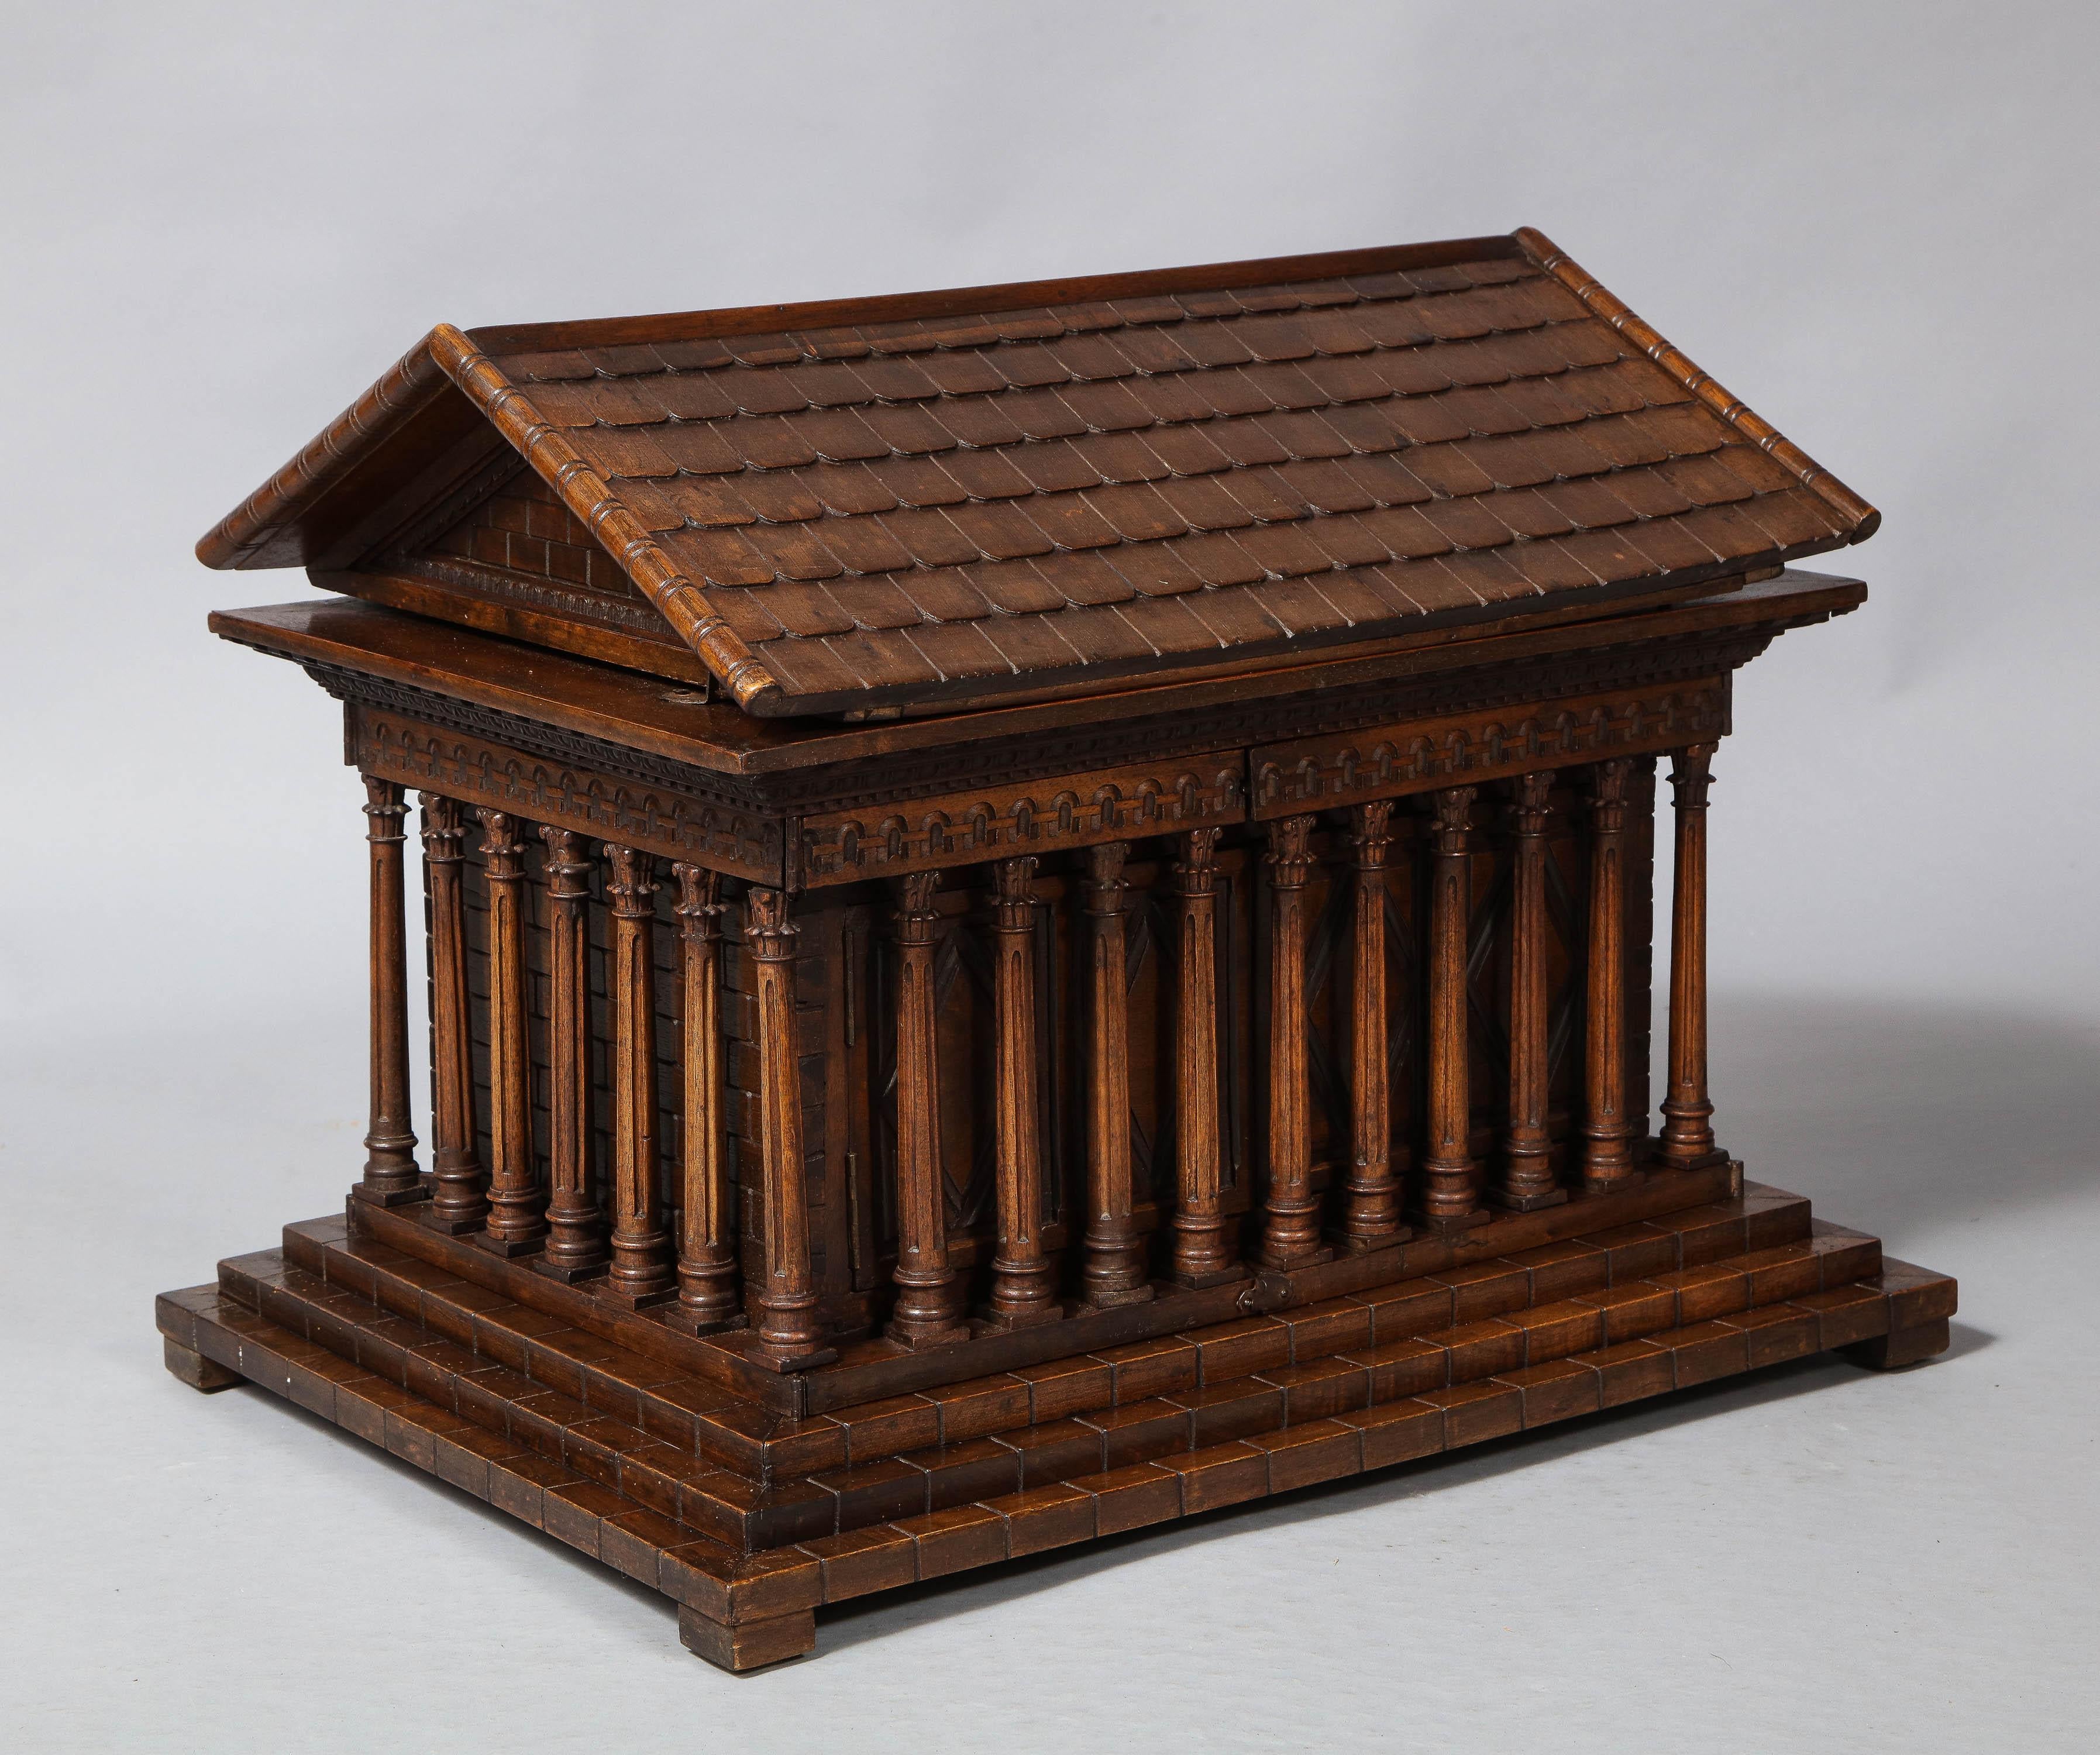 Very fine carved walnut architectural model of a Greco-Roman temple, with hinged lid and column fronted doors, circa 1840, each row of columns either hinged or removable, possibly made as an apprentice piece or perhaps just an intriguing